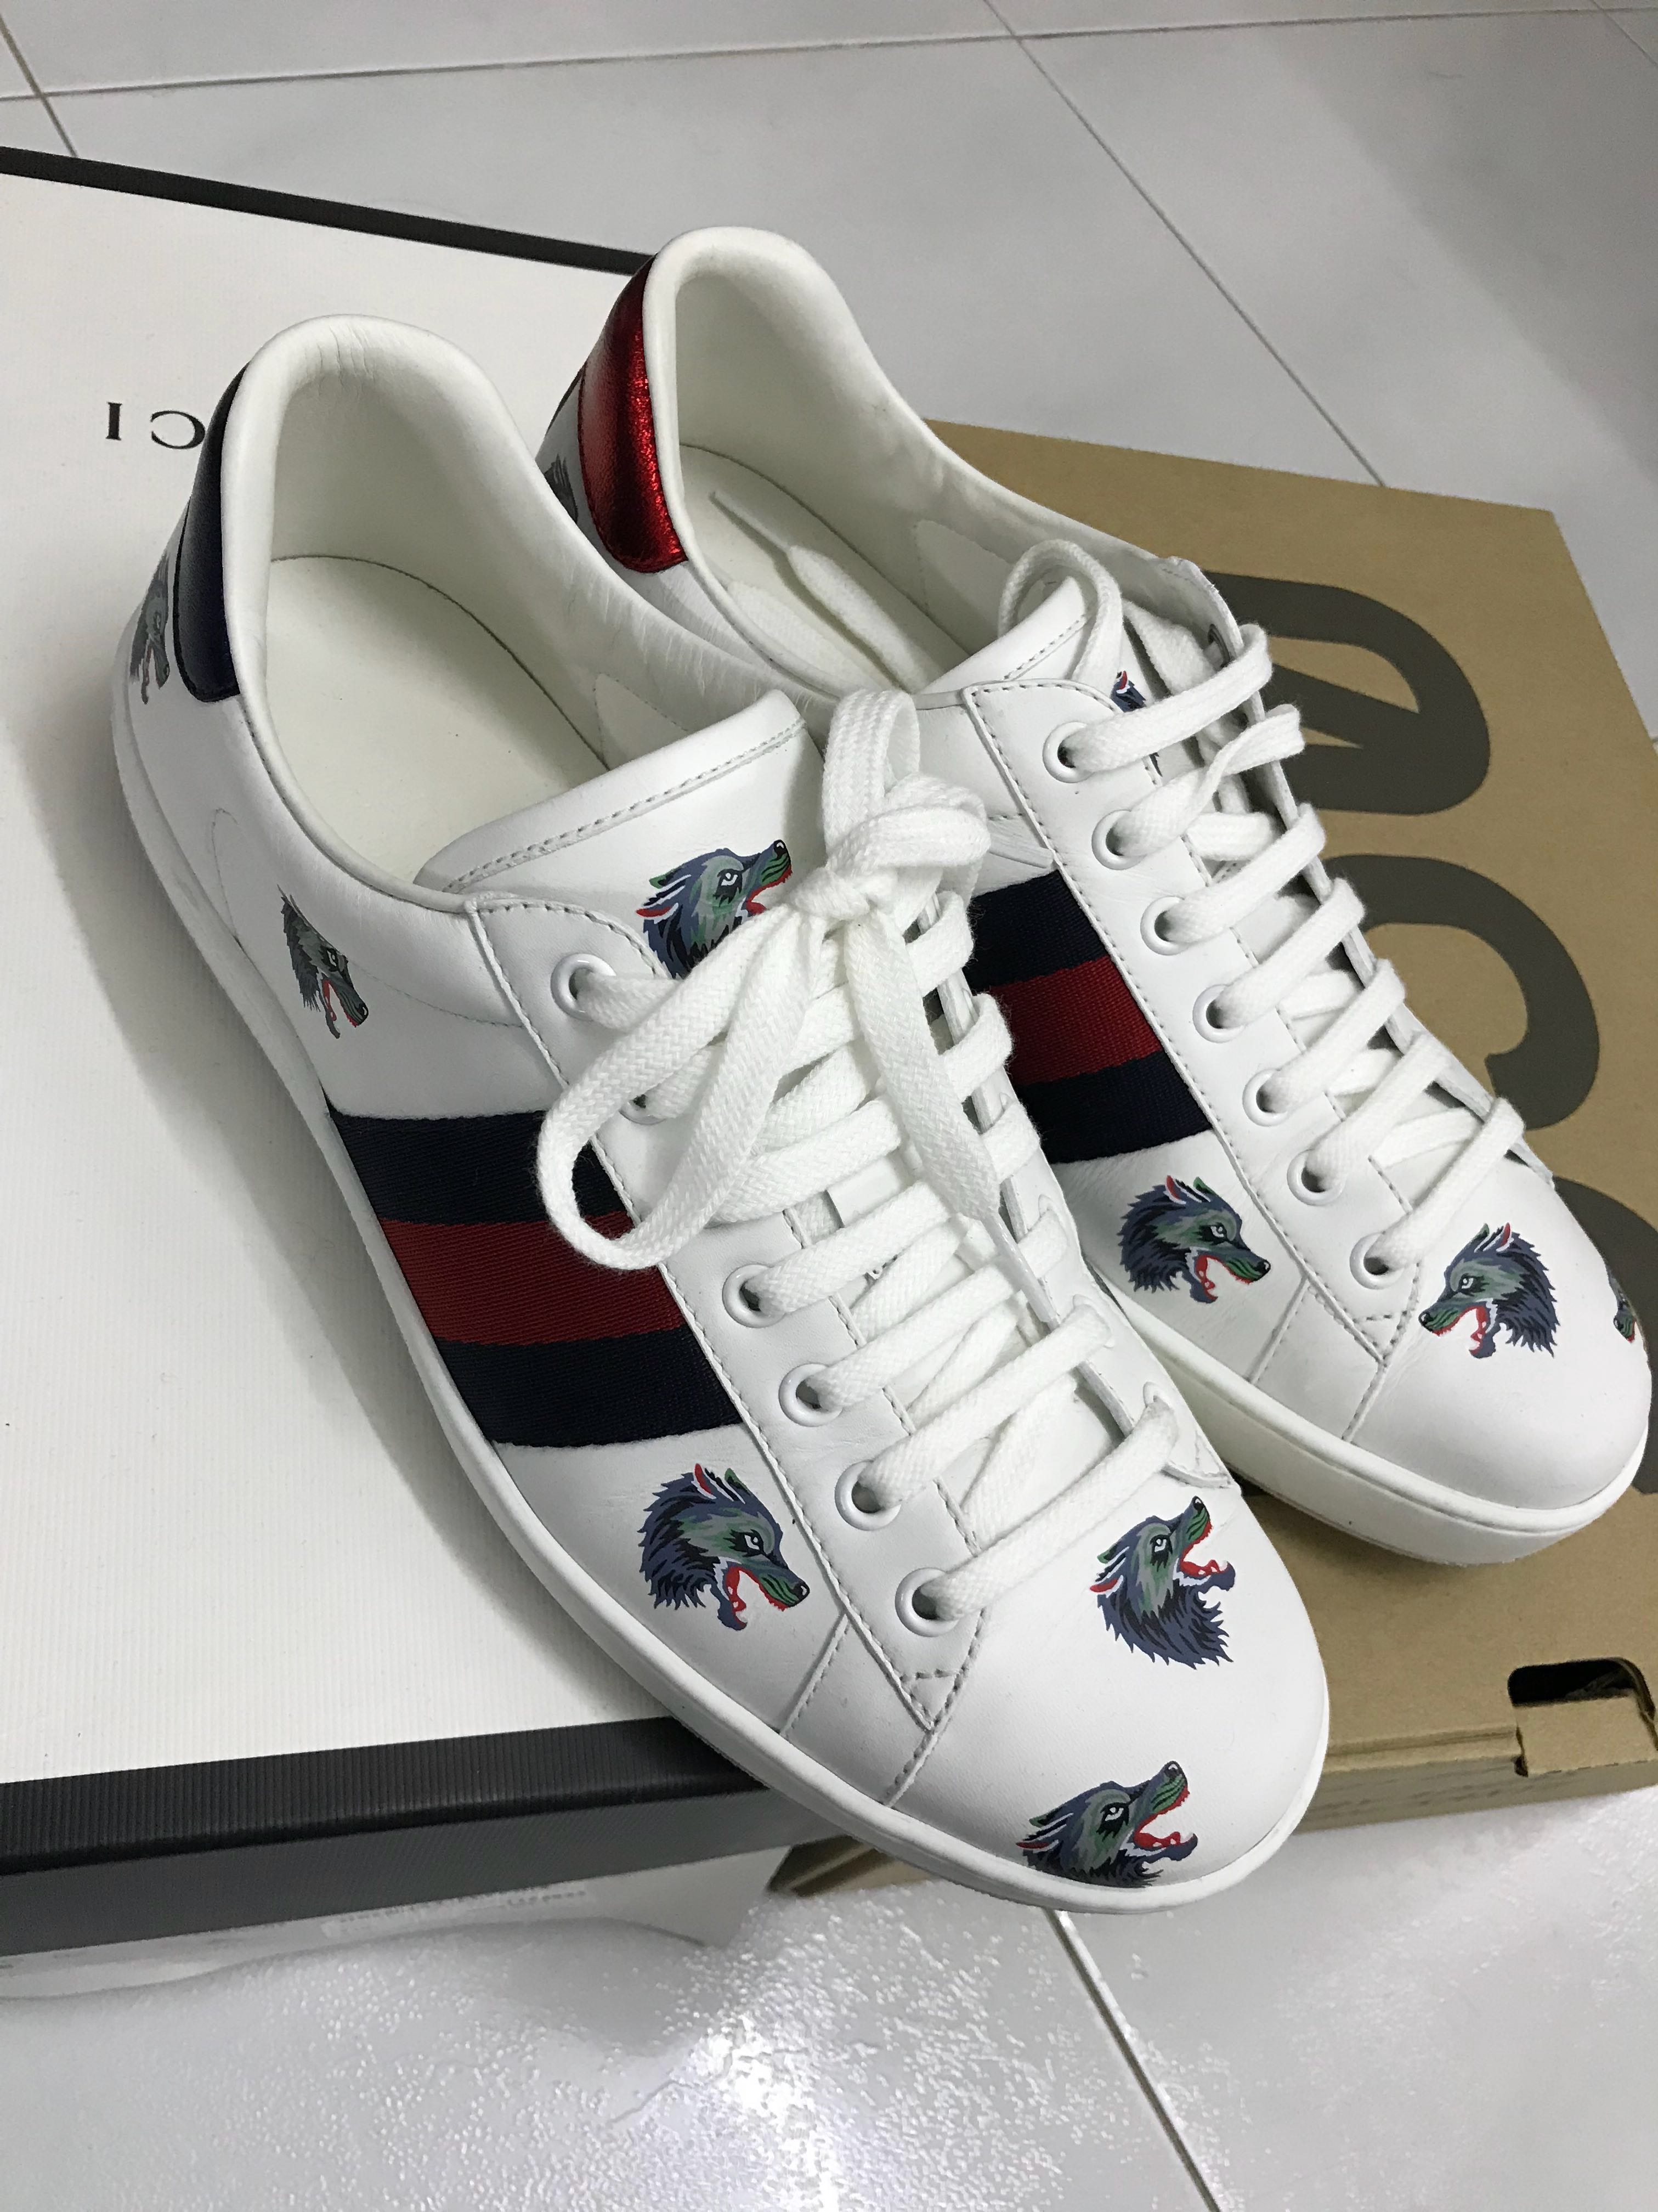 gucci shoes with wolf